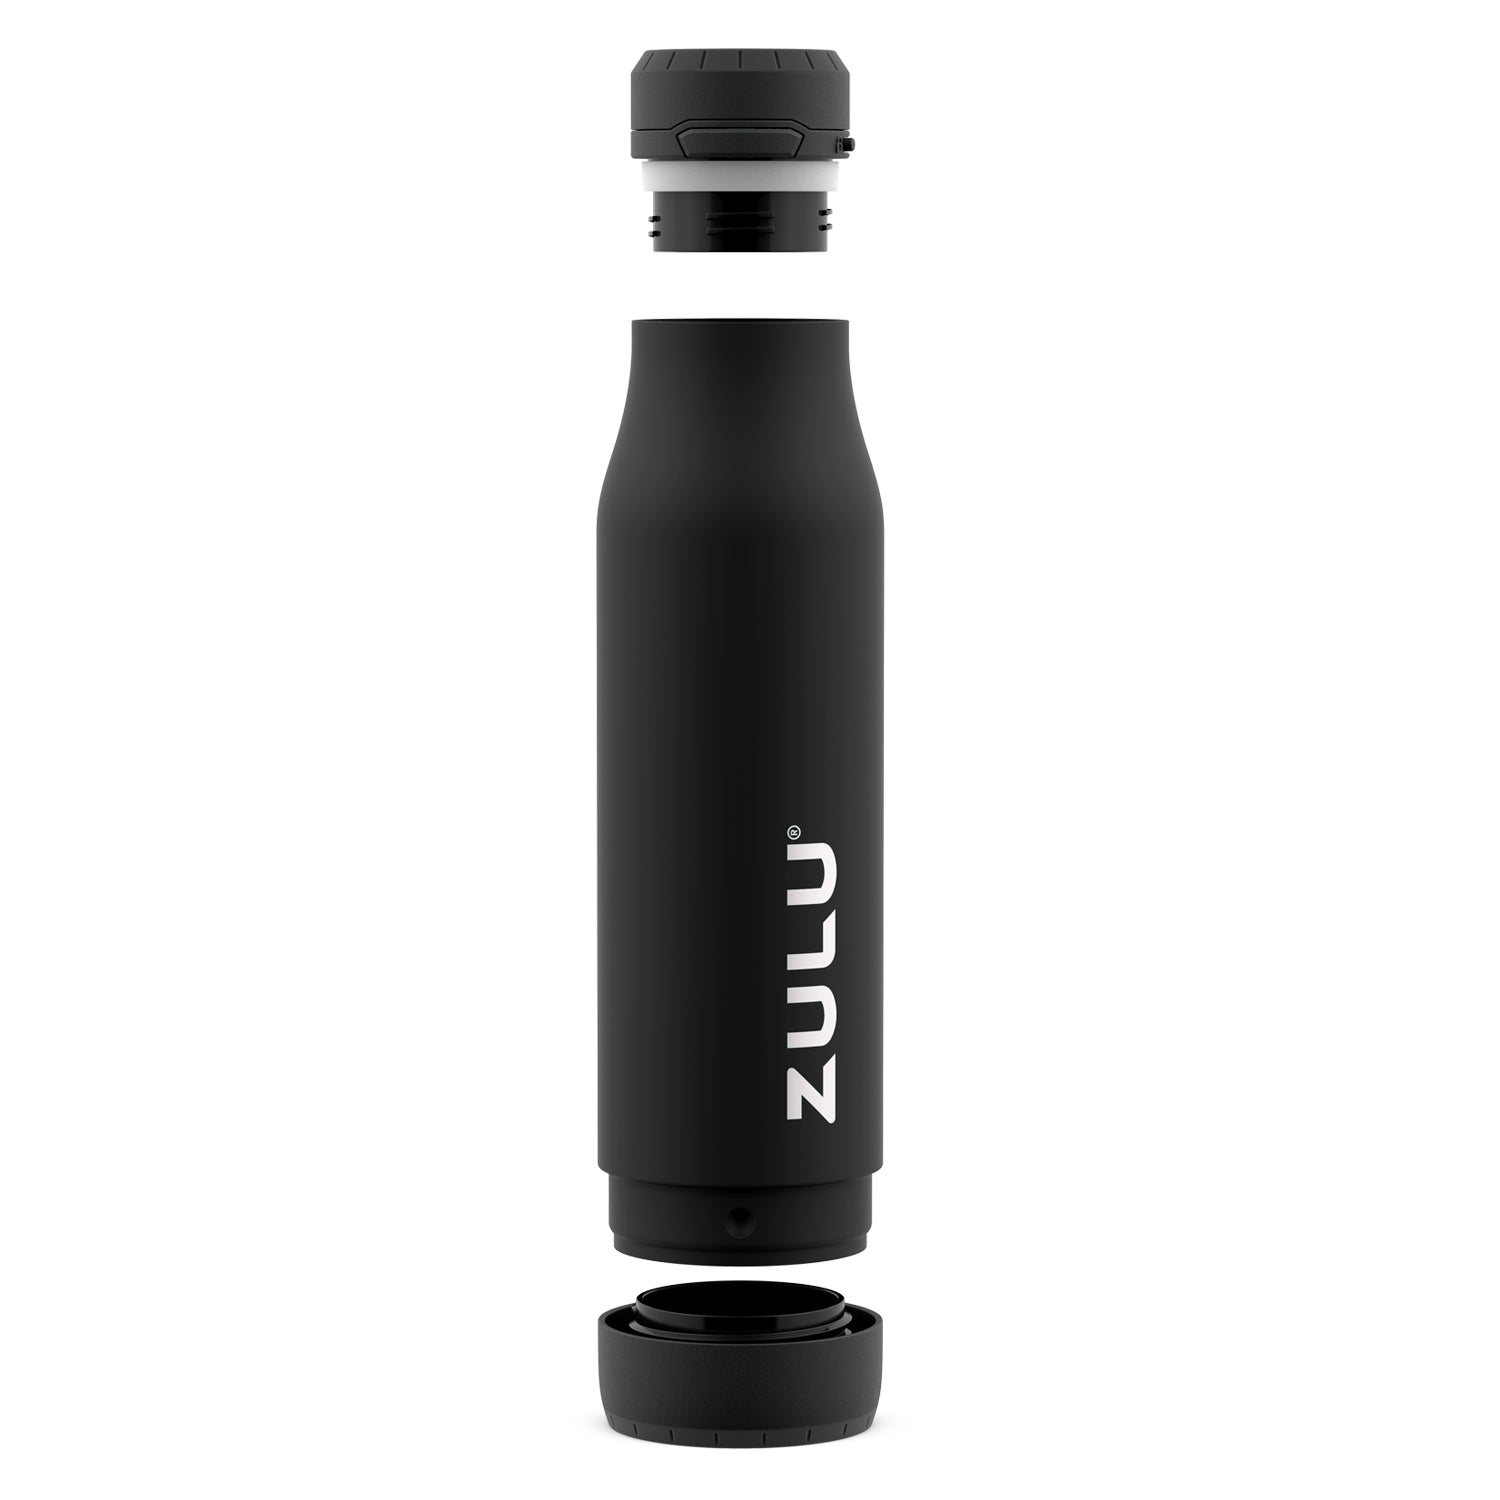 Zulu Ace Vacuum Insulated Stainless Steel Water Bottle with Removable Base - Leak Proof Lid - Antimicrobial Spout, 24 oz, White